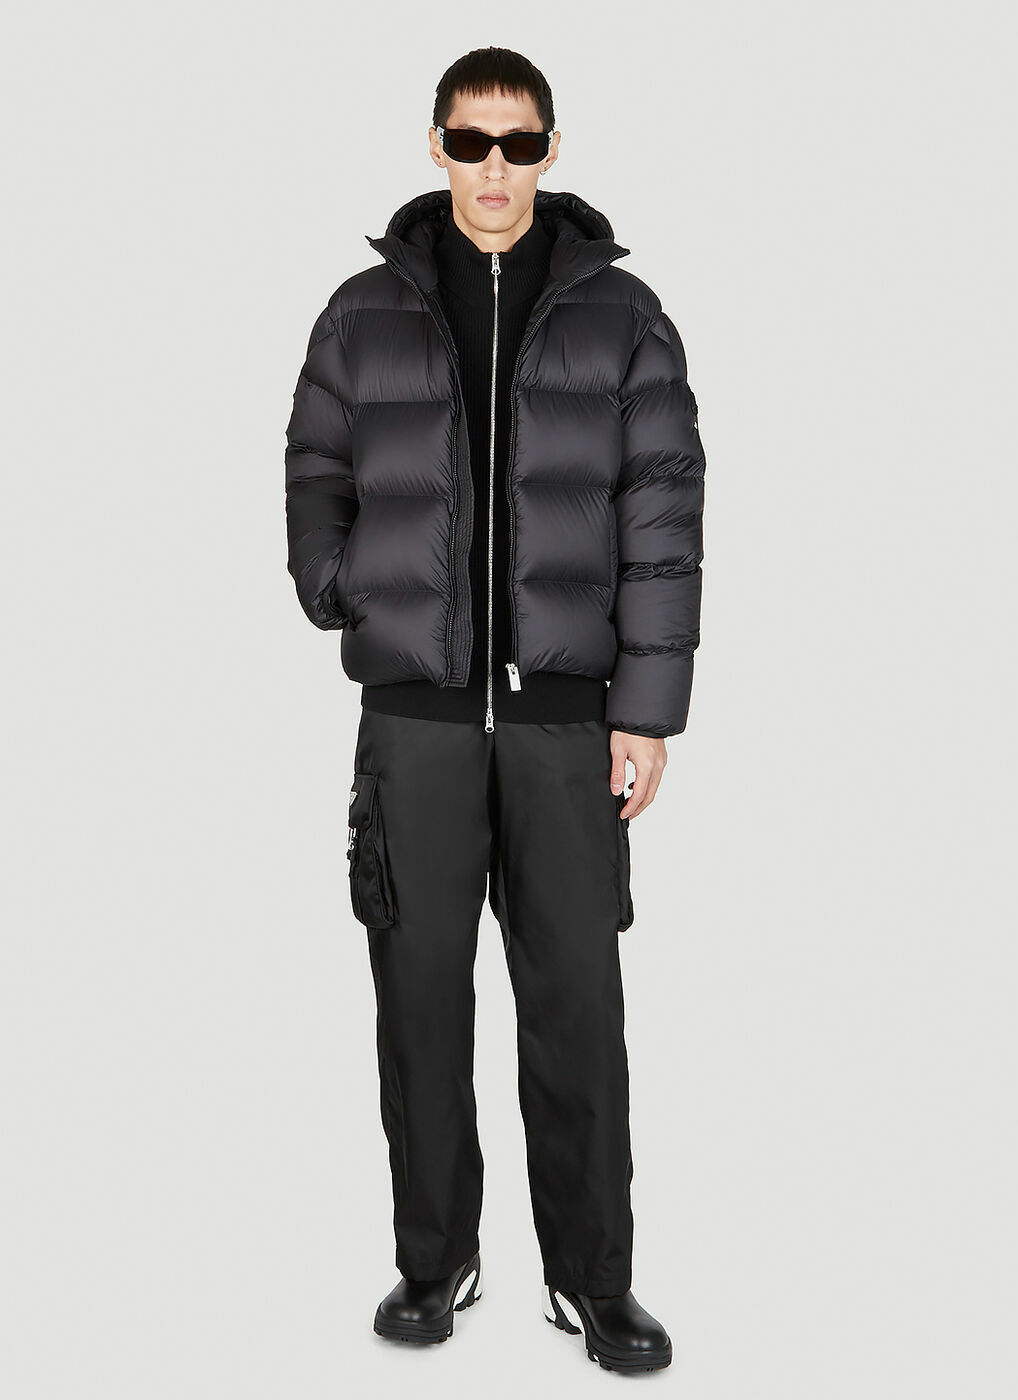 6 Moncler 1017 ALYX SM - Apody Hooded Puffer Jacket in Black